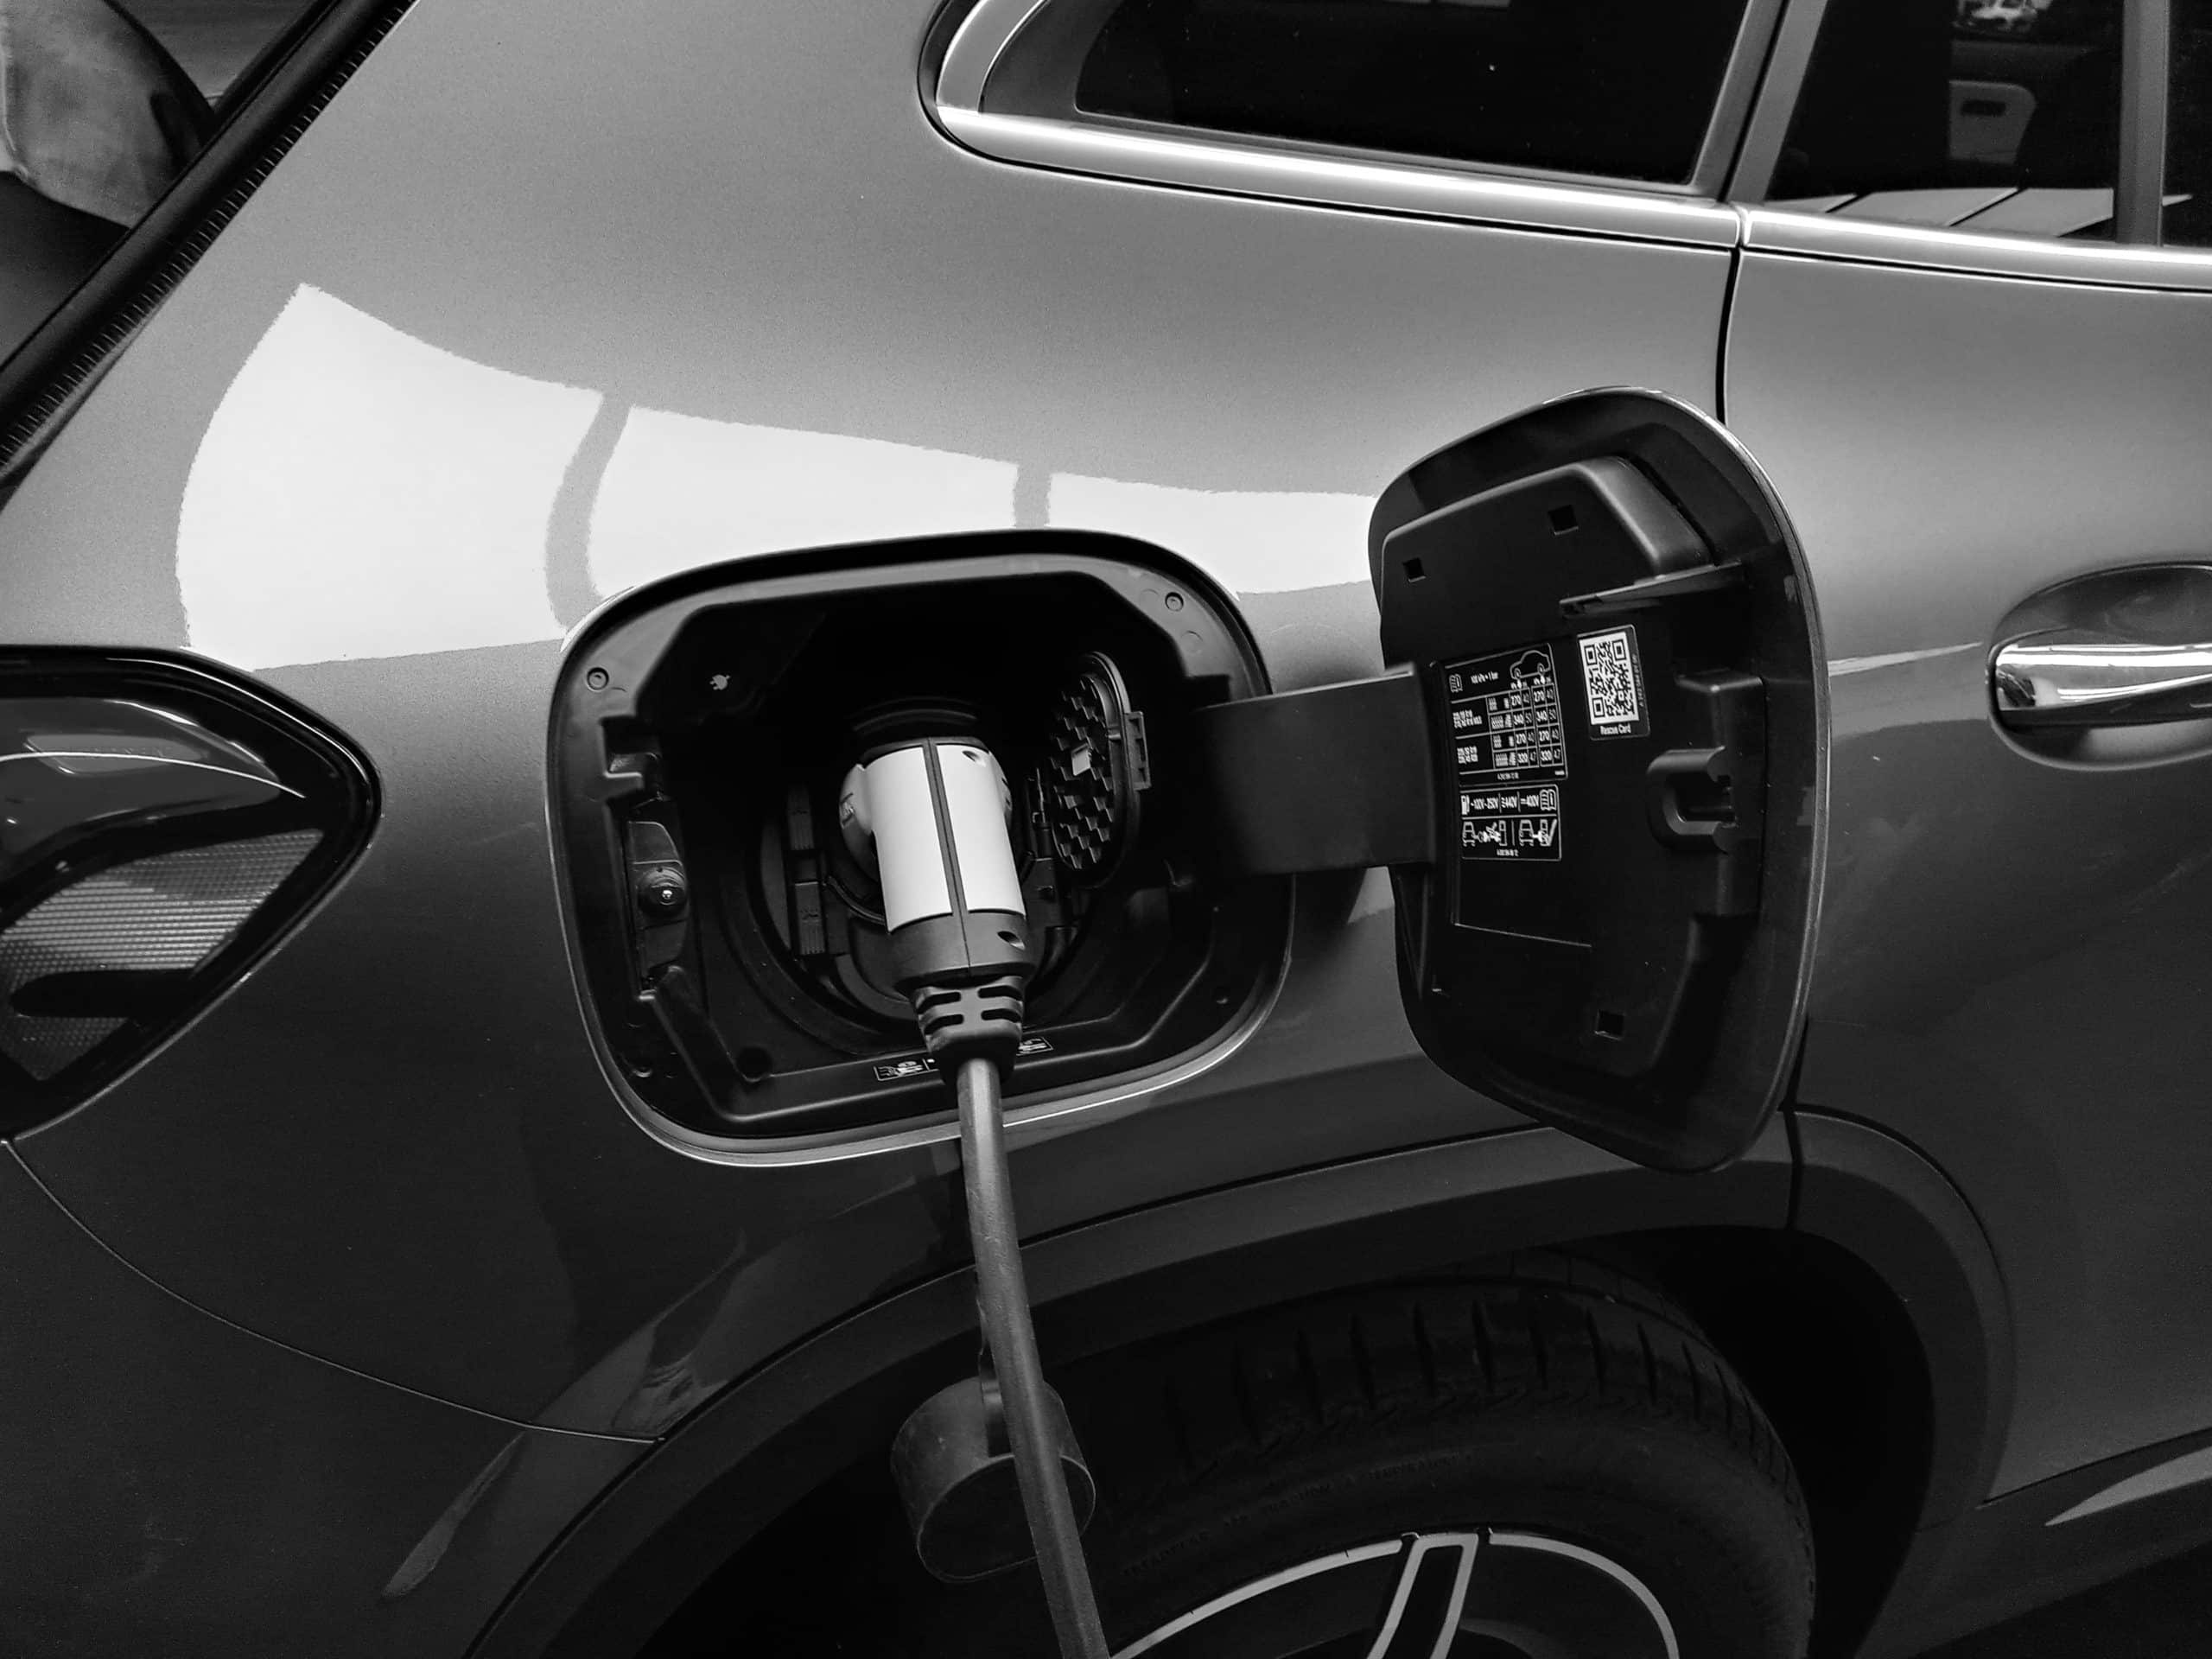 How Much Does Installing Electric Car Charging at Home Cost?